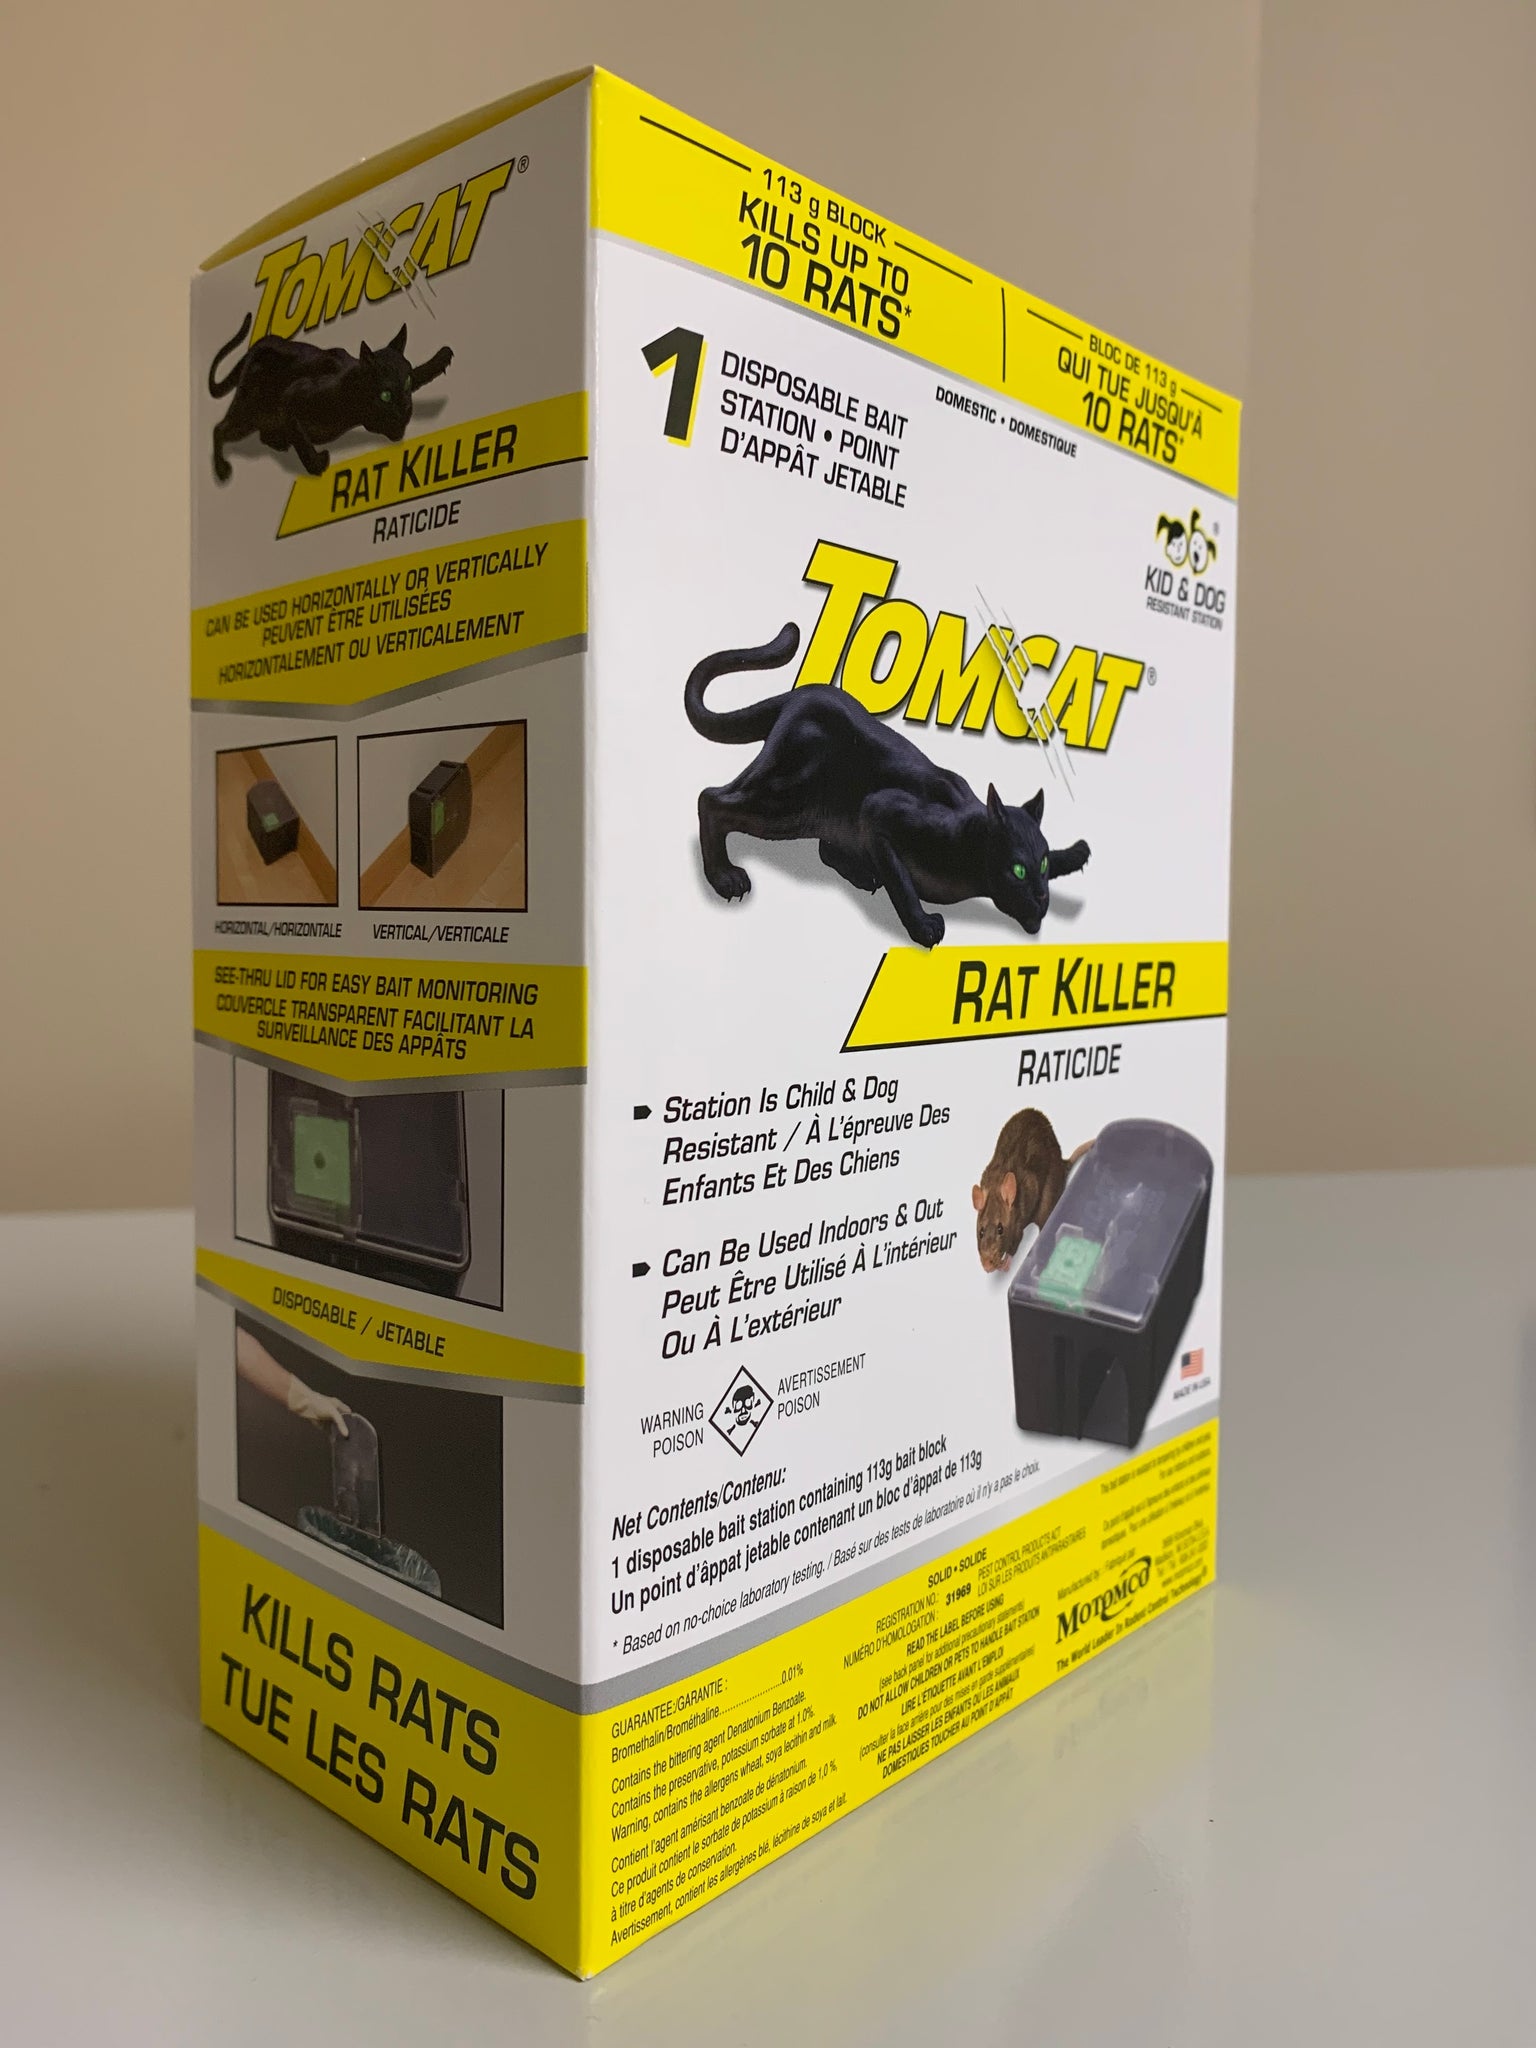 How To Use Tomcat Disposable Rat And Mouse Bait Stations 